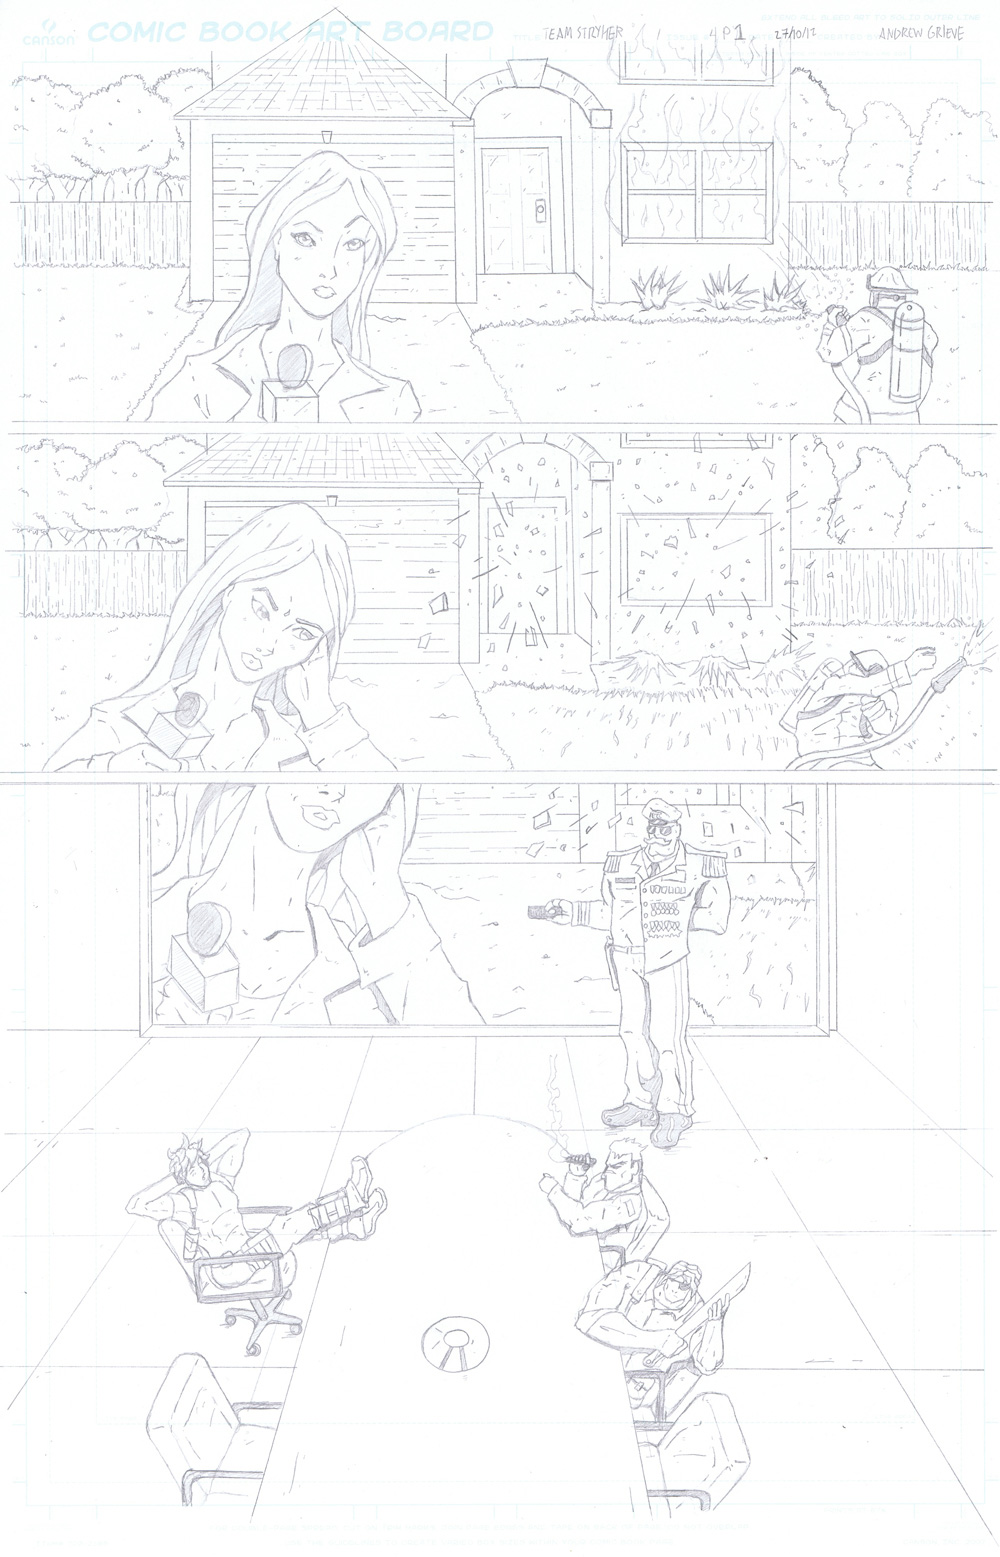 MISSION 004: PAGE 01 PENCIL